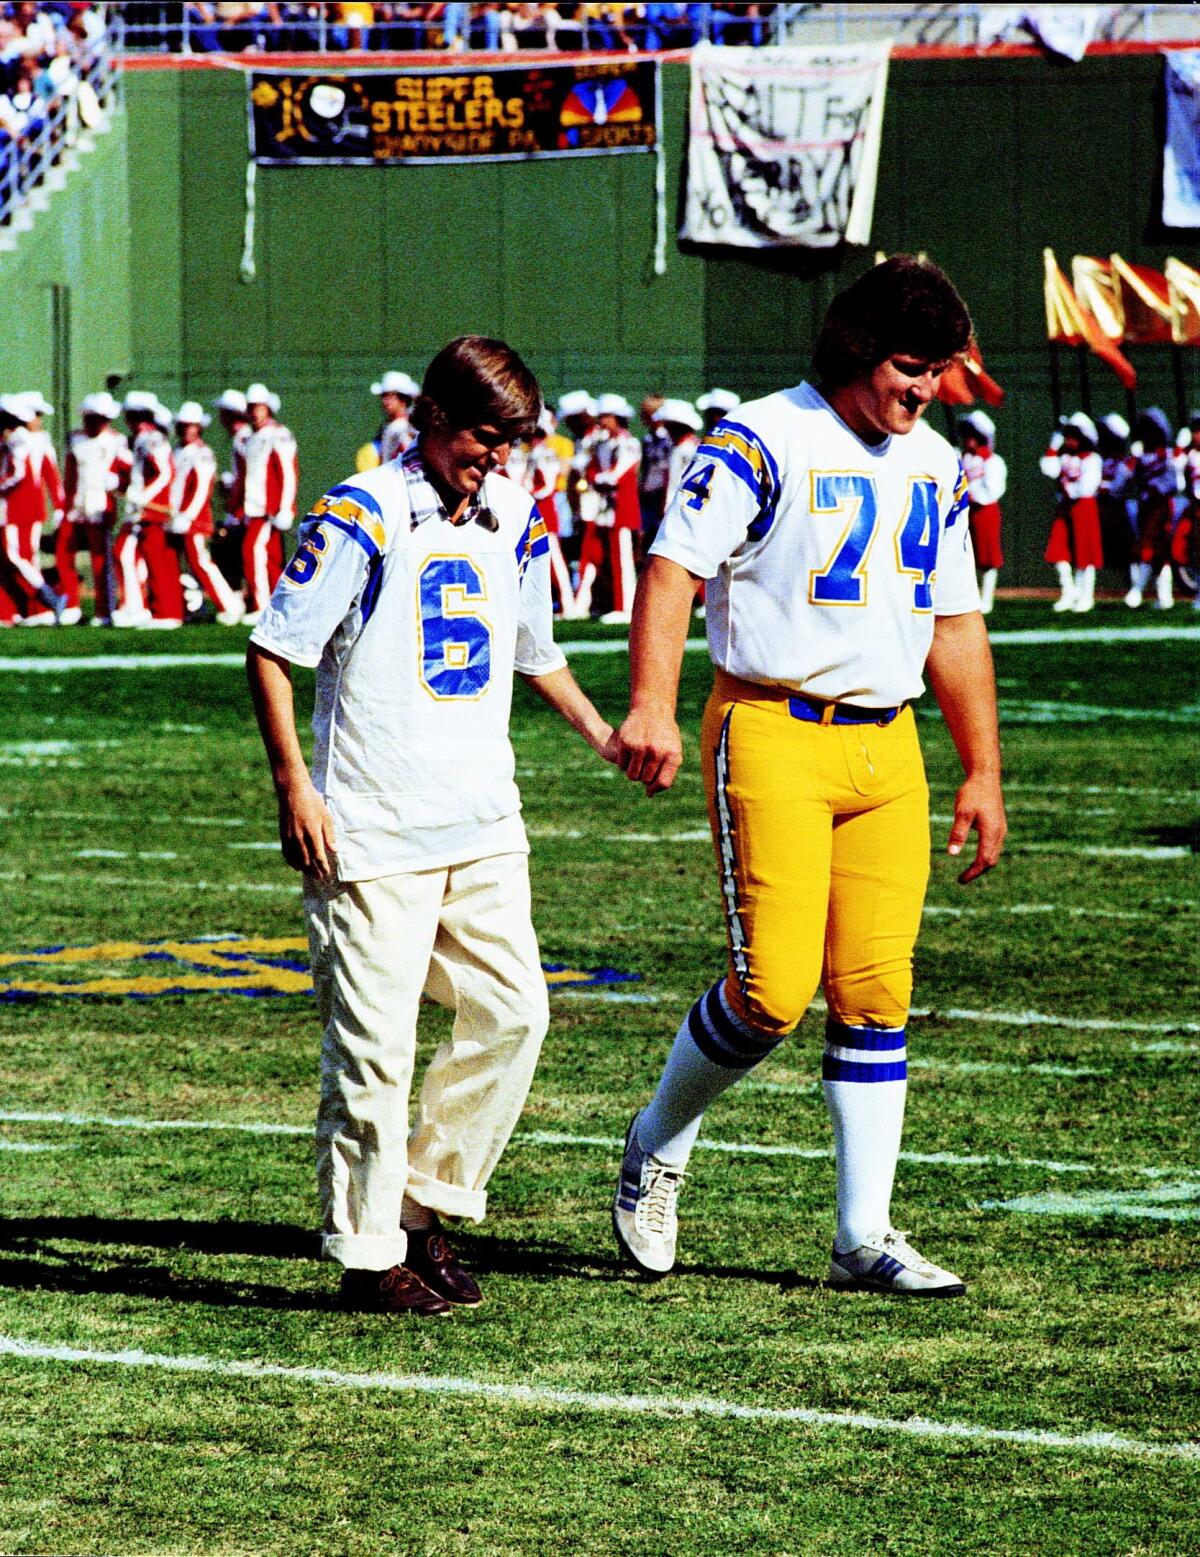 Chargers kicker Rolf Benirschke joins Louie Kelcher (74) to participate in the coin toss before the Chargers-Steelers game. 